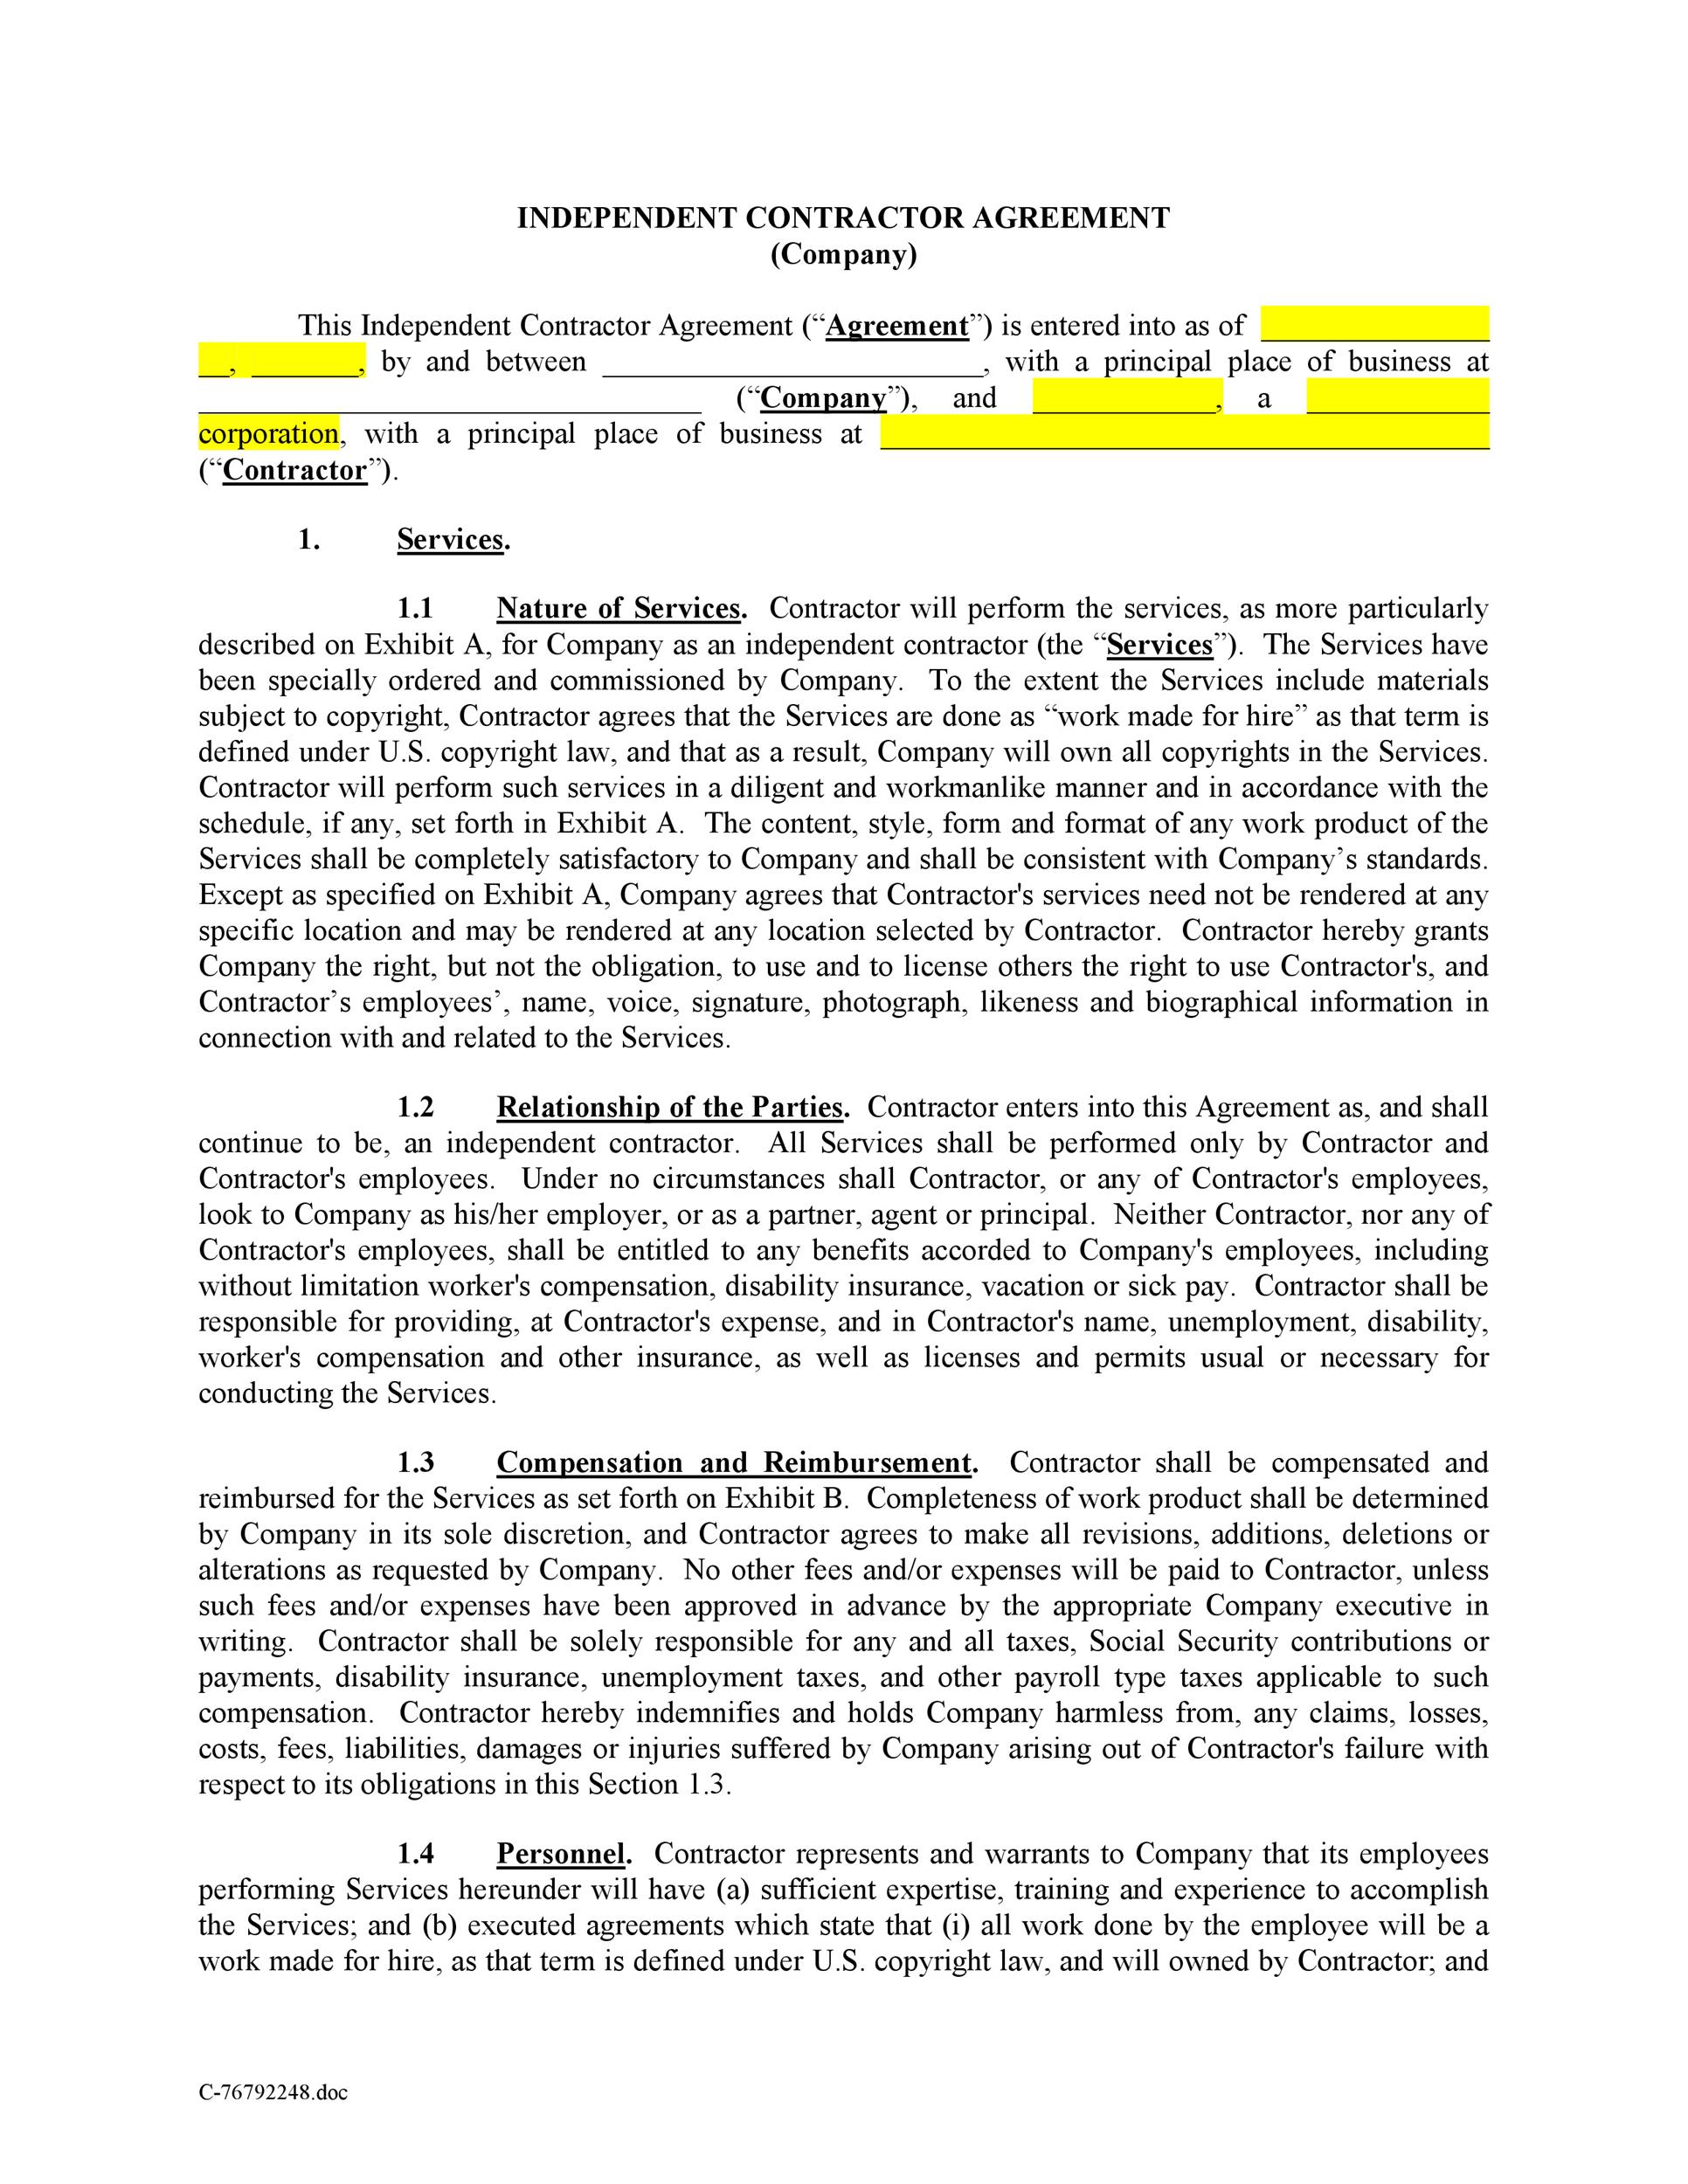 Free independent contractor agreement 01